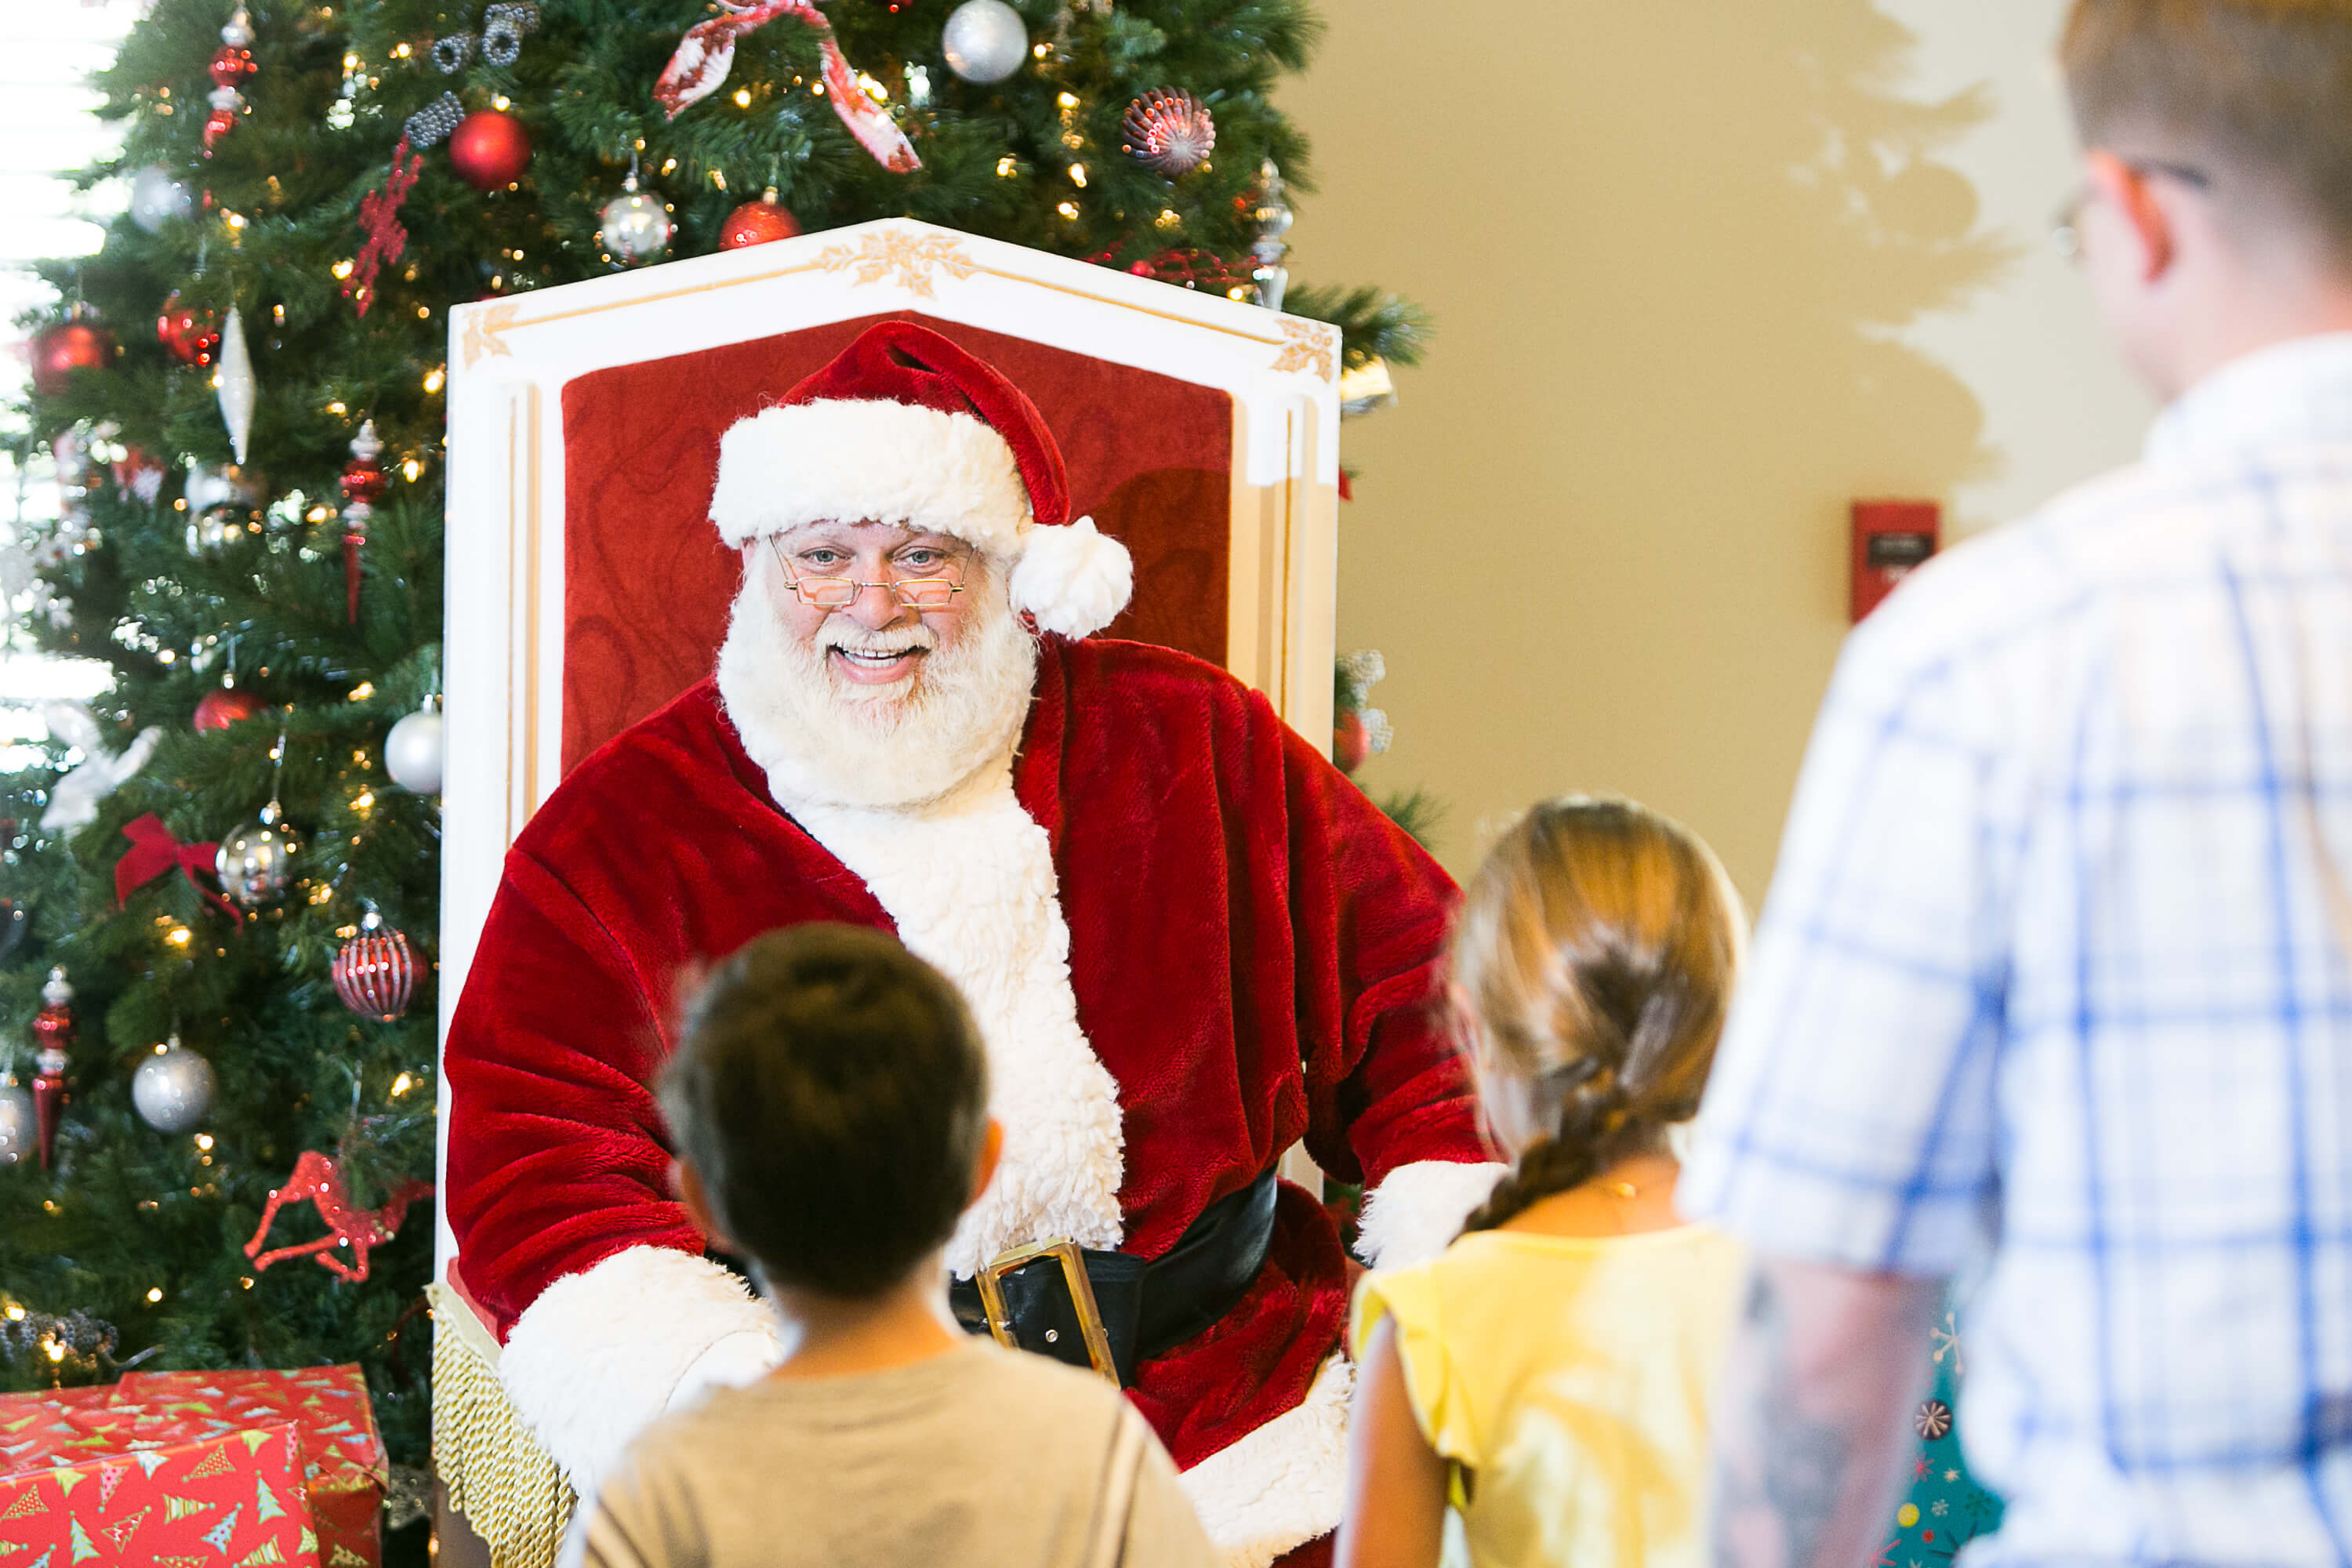 Planning a corporate family-friendly holiday party